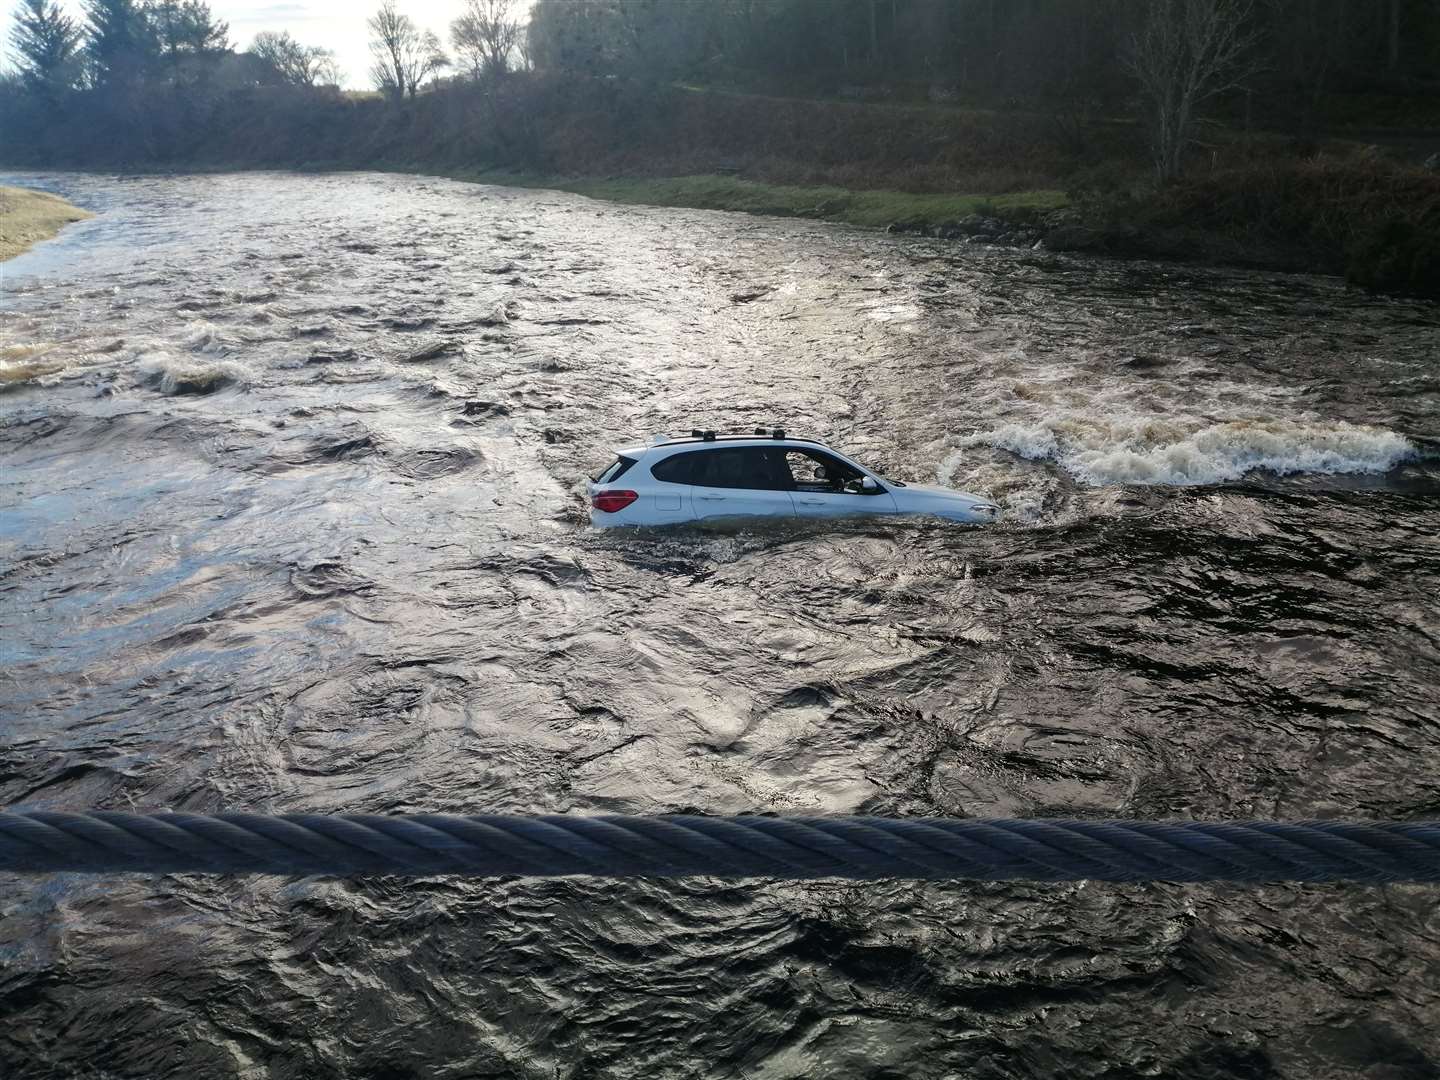 The car floated in the river for two days before being removed. Picture: John Murray (Biba)